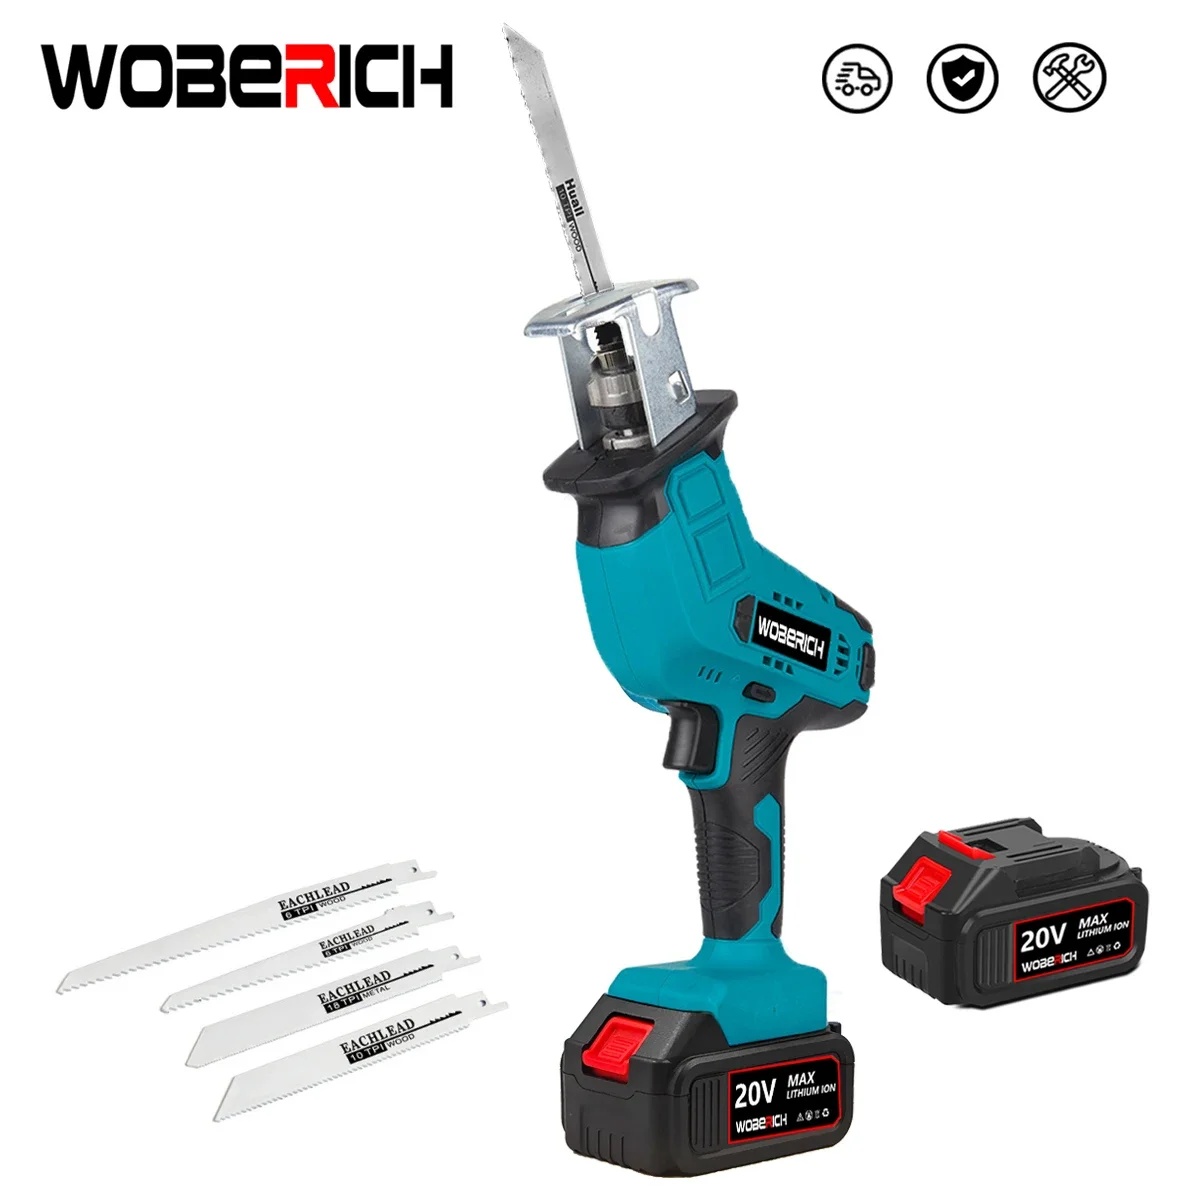 electric cordless reciprocating saw adjustable speed chainsaw wood metal pvc pipe cutting bandsaw tools for makita 18v battery Cordless Reciprocating Saw 18V Adjustable Speed Electric Saw Wood Metal PVC Pipe Cutting fit Makita 18v Battery By WOBERICH